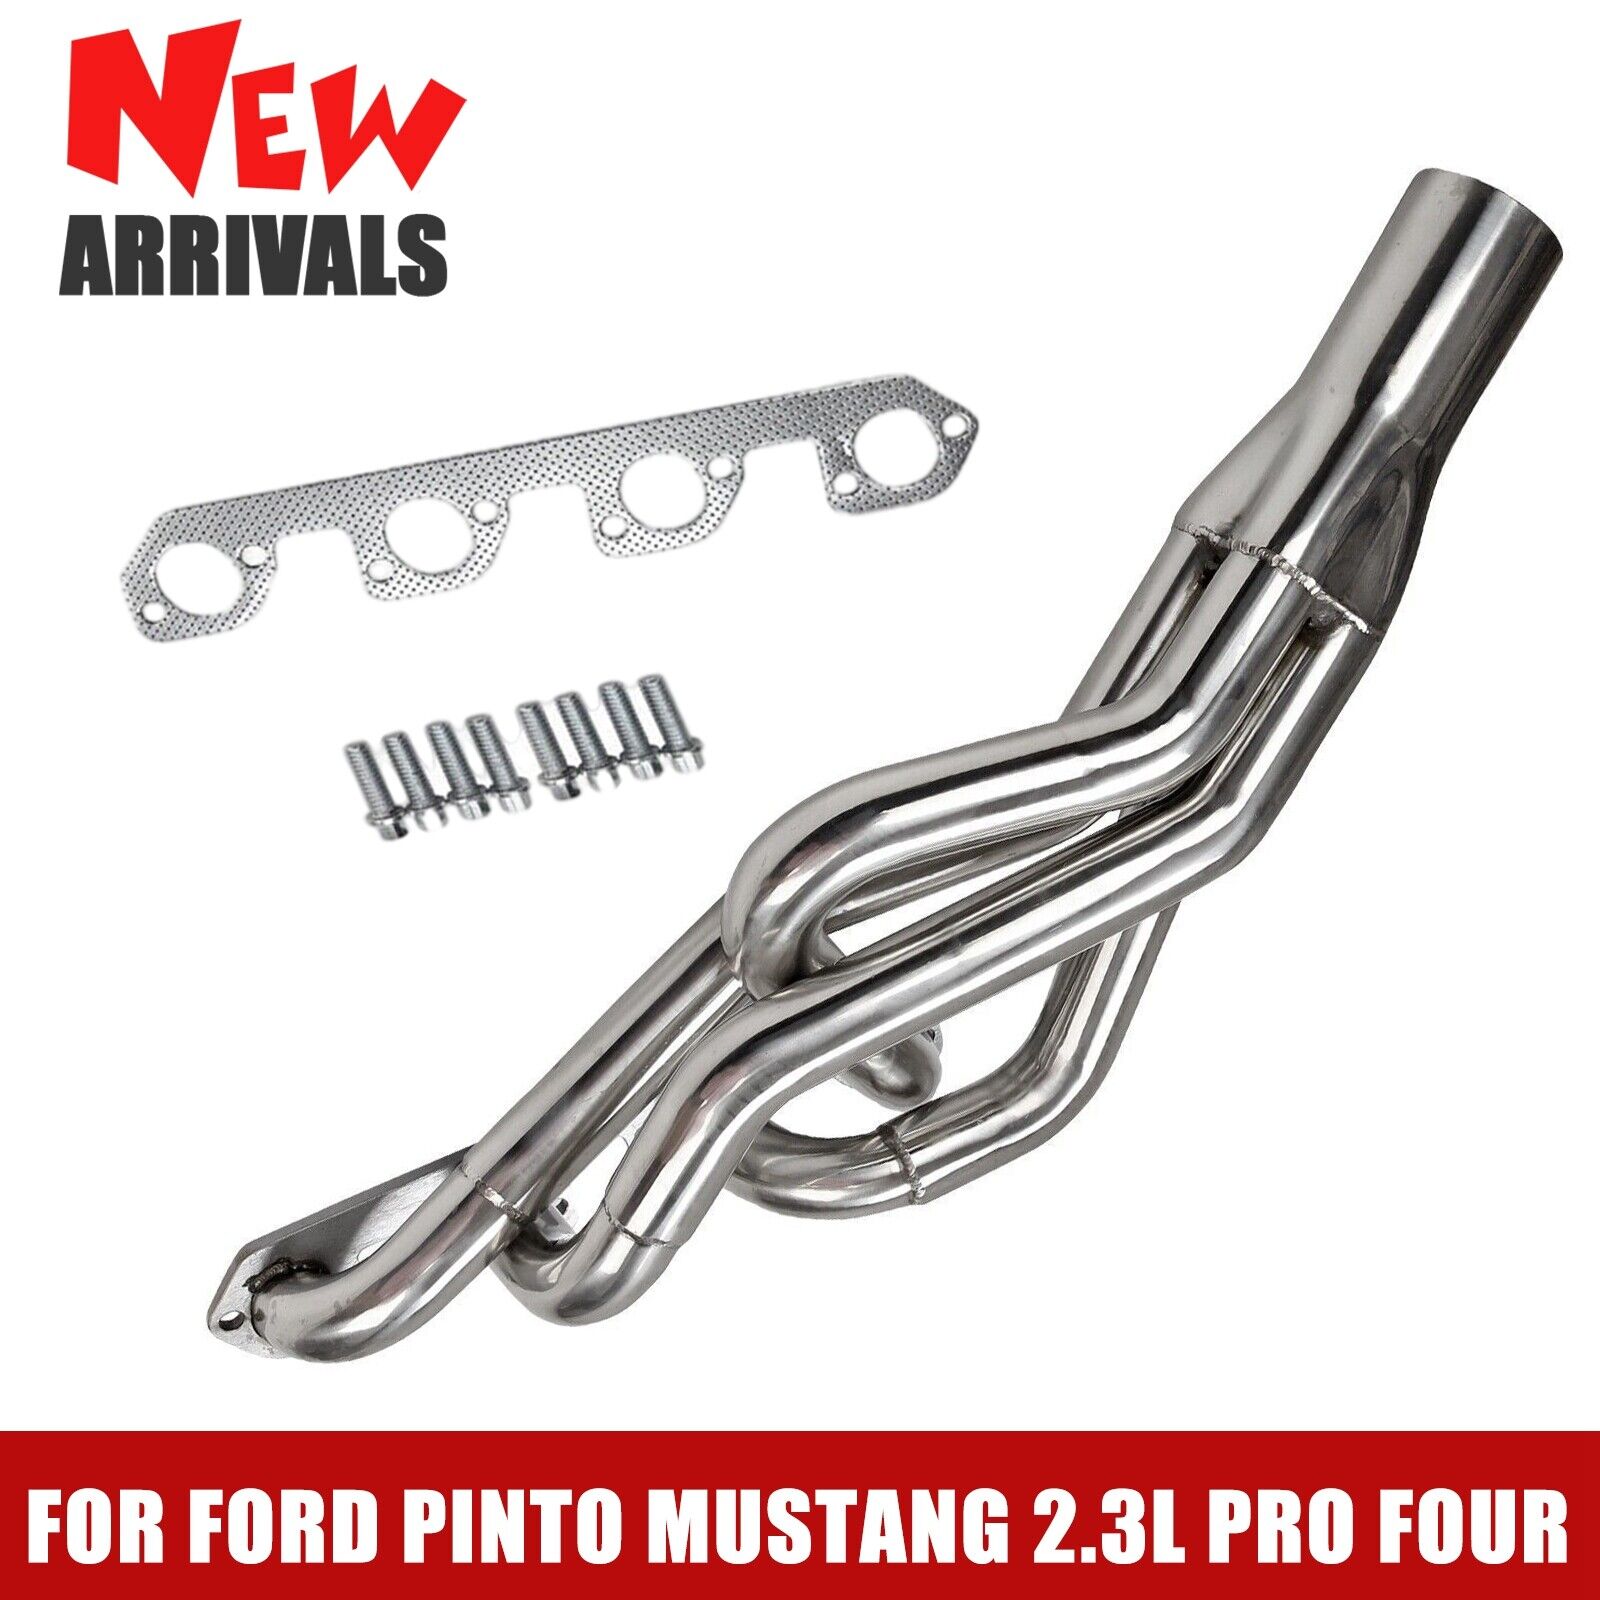 2023 Stainless Steel Manifold Headers Fit for Ford Pinto Mustang 2.3L Pro FourAr